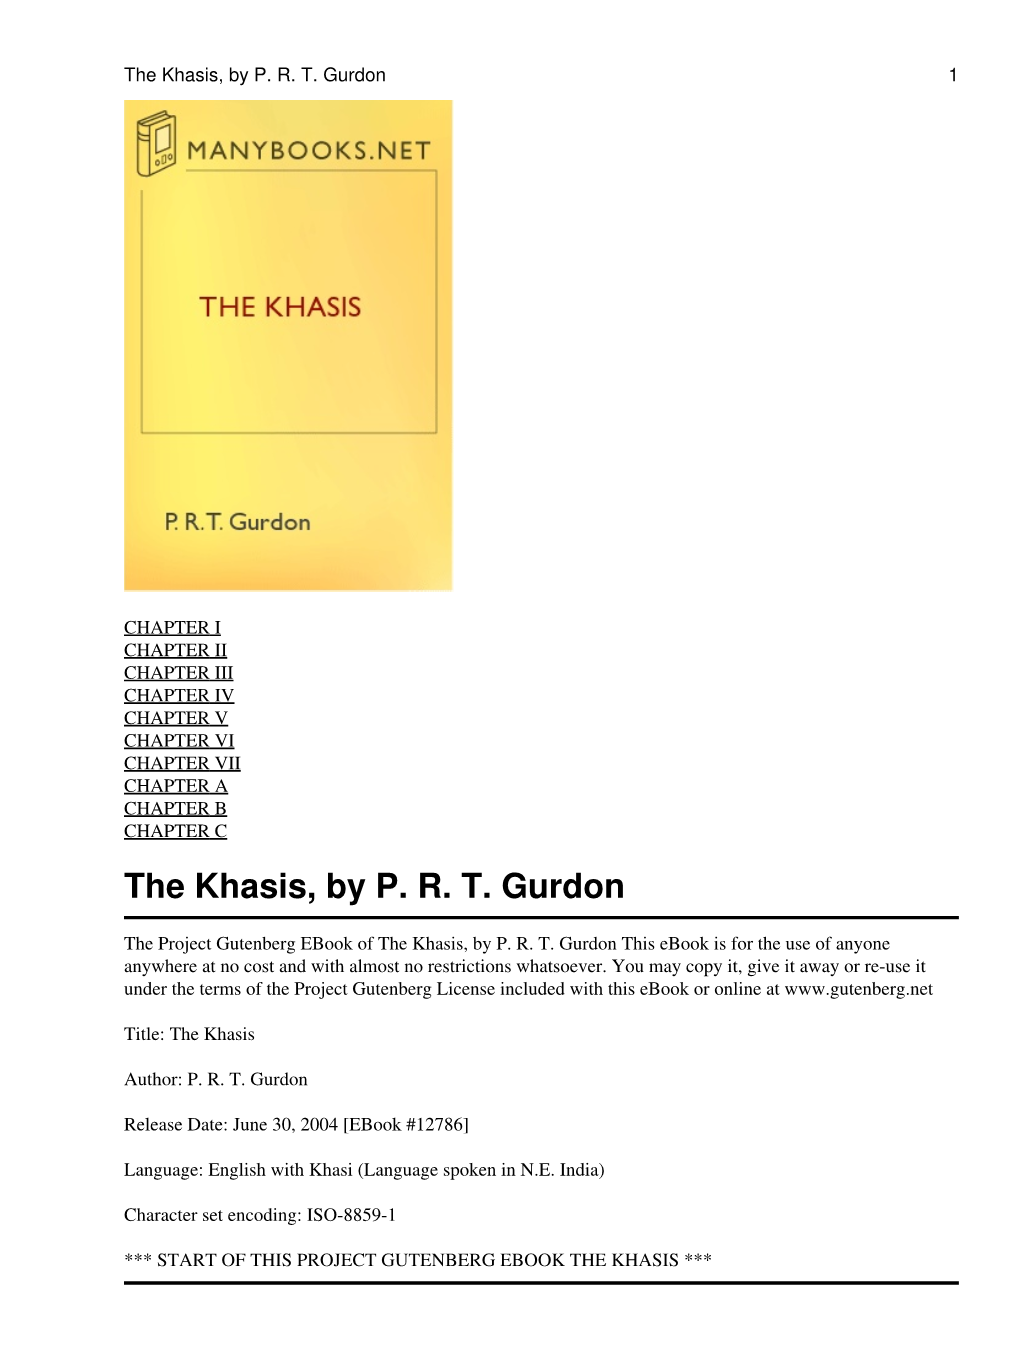 The Khasis, by P